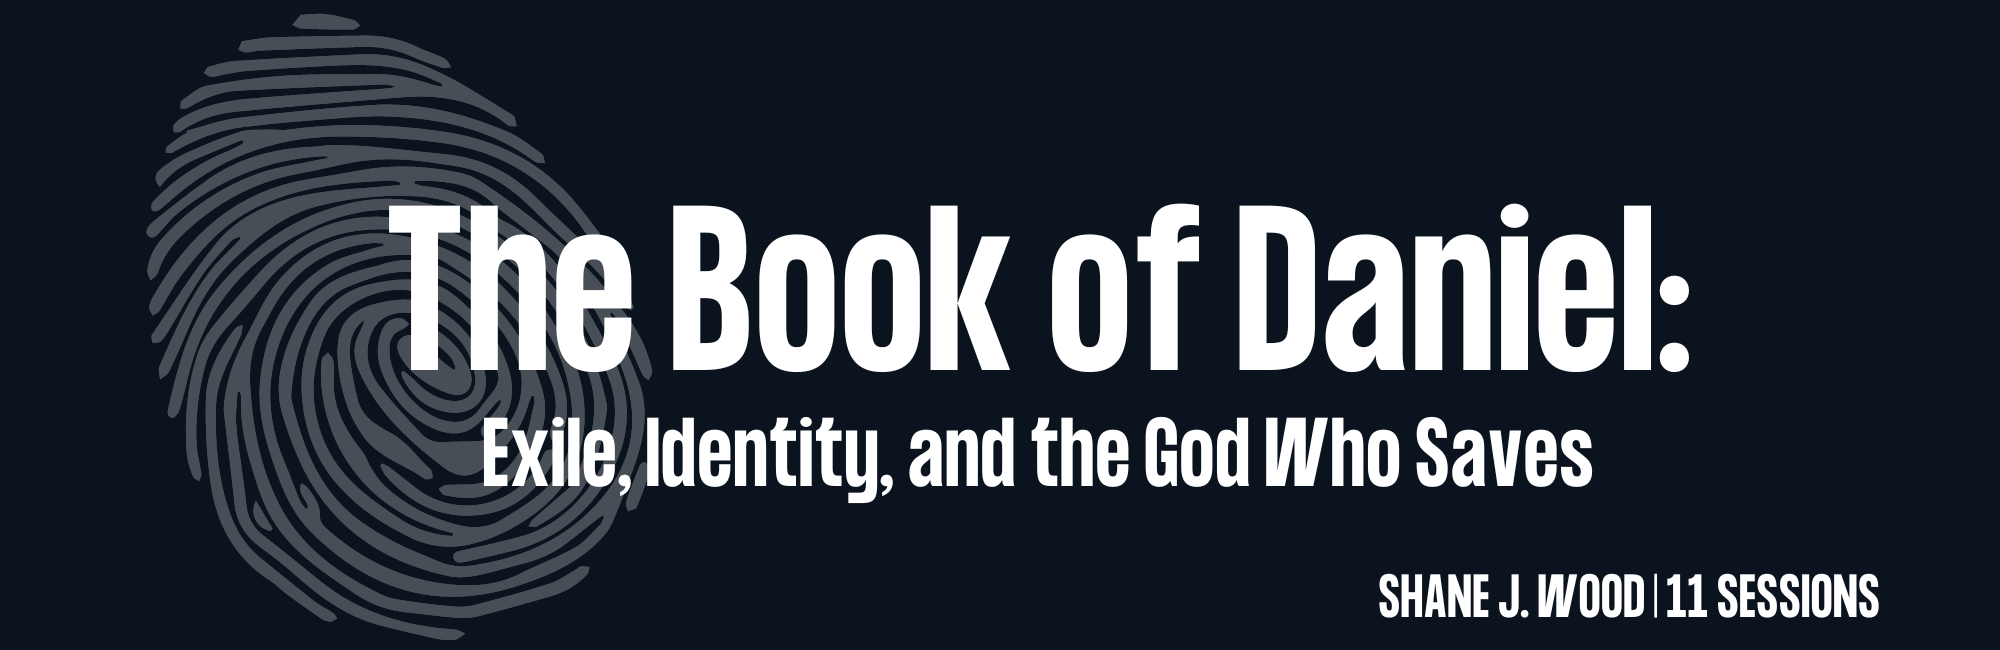 The Book of Daniel: Exile, Identity, and the God Who Saves